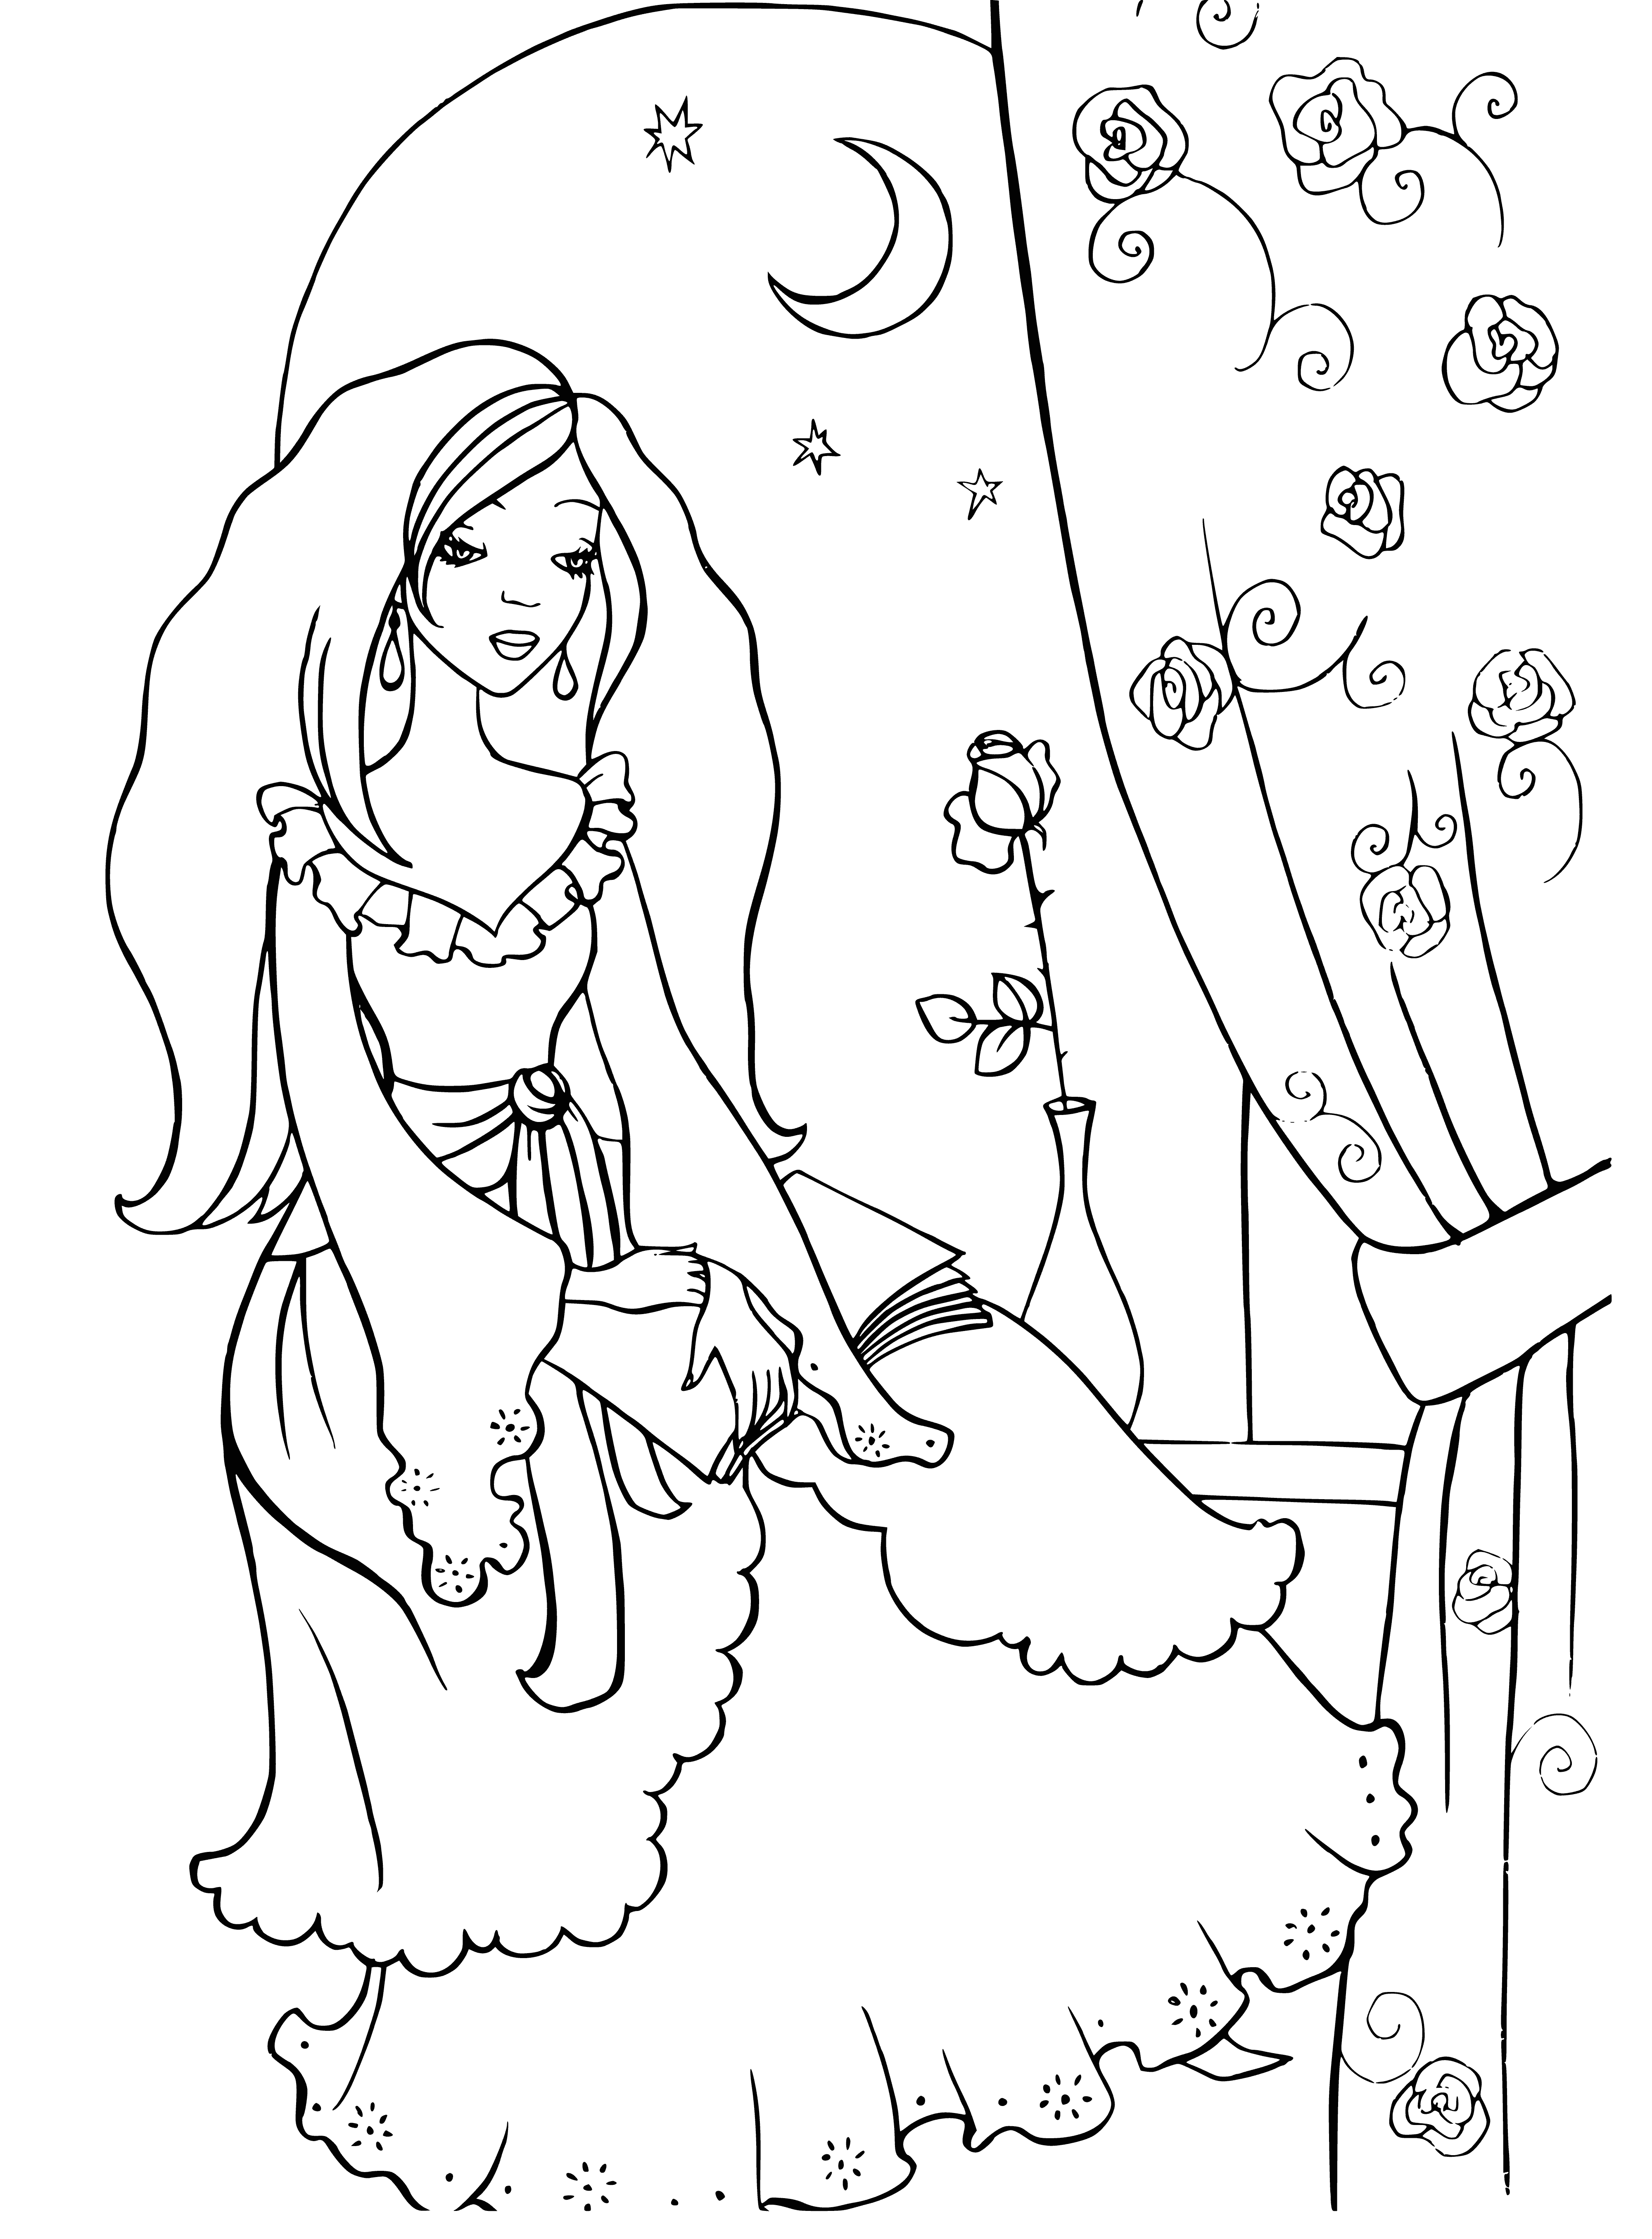 Before bedtime coloring page